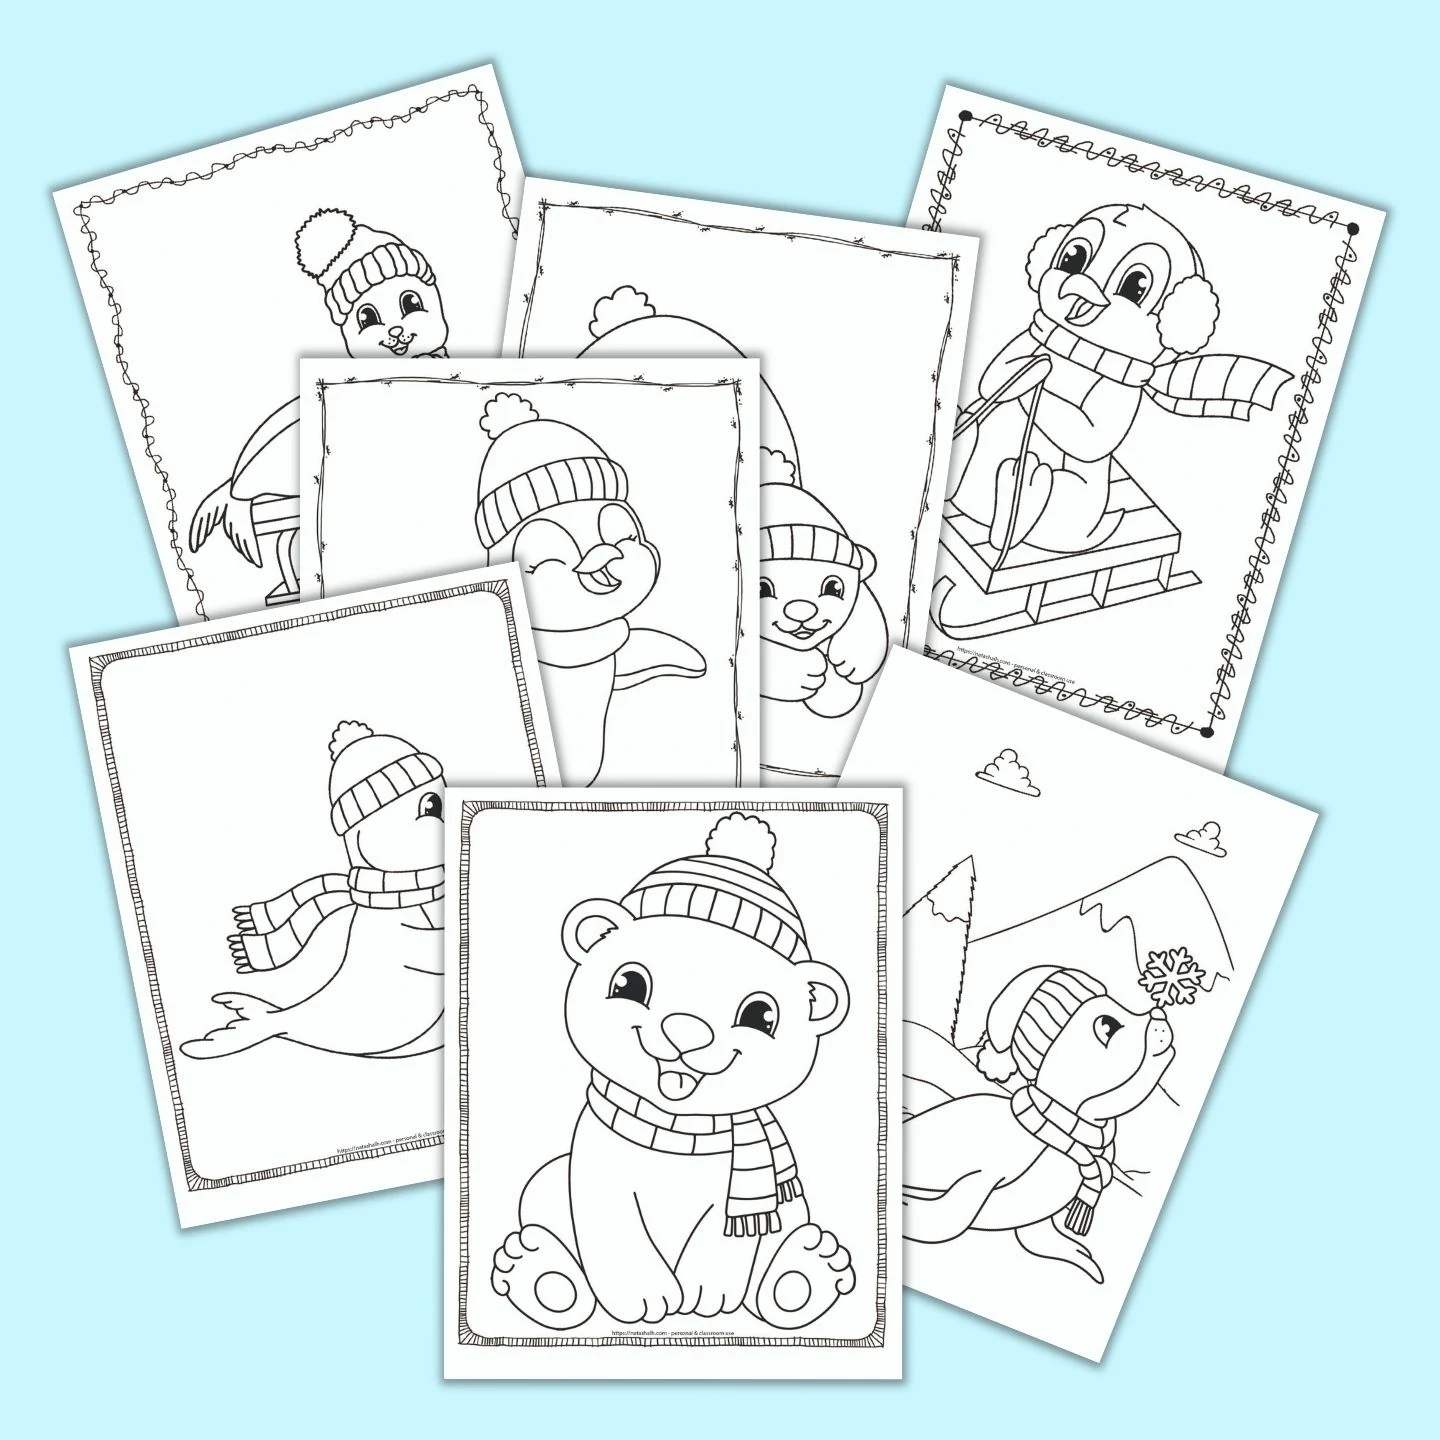 Free Printable Rainbow Coloring Pages   The Artisan Life